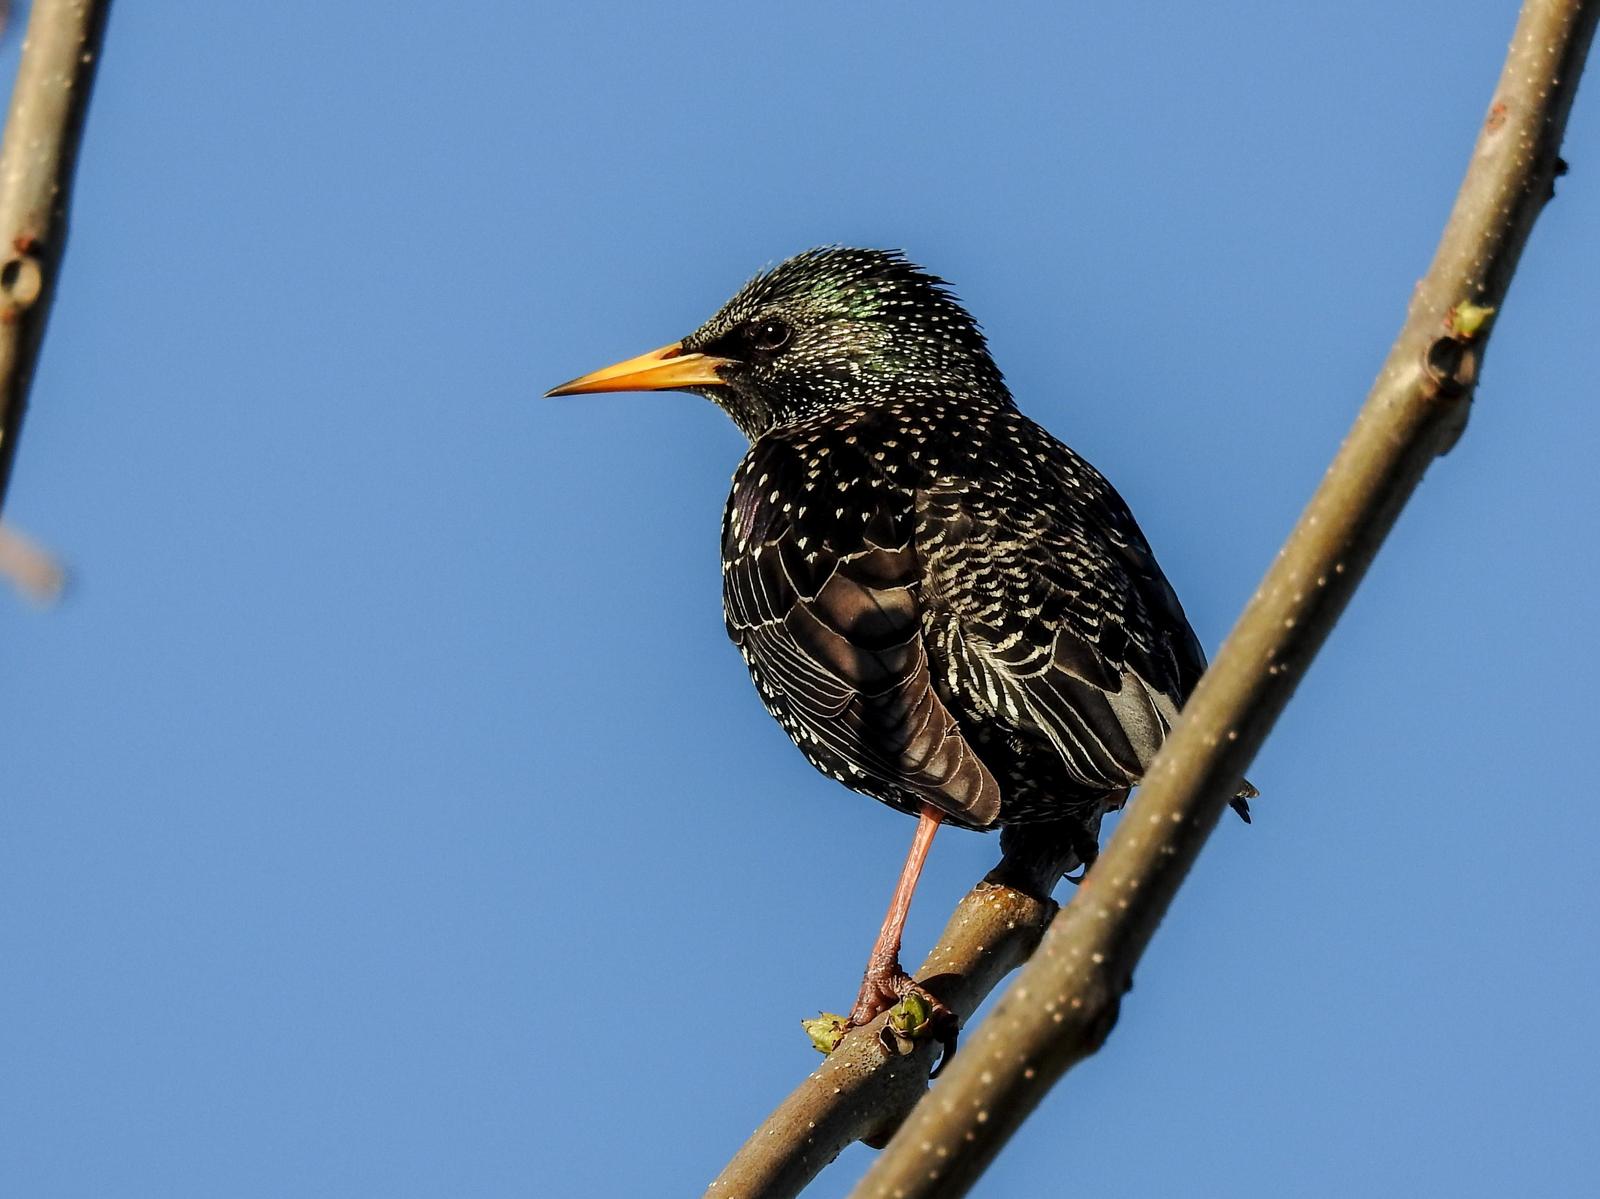 European Starling Photo by African Googre